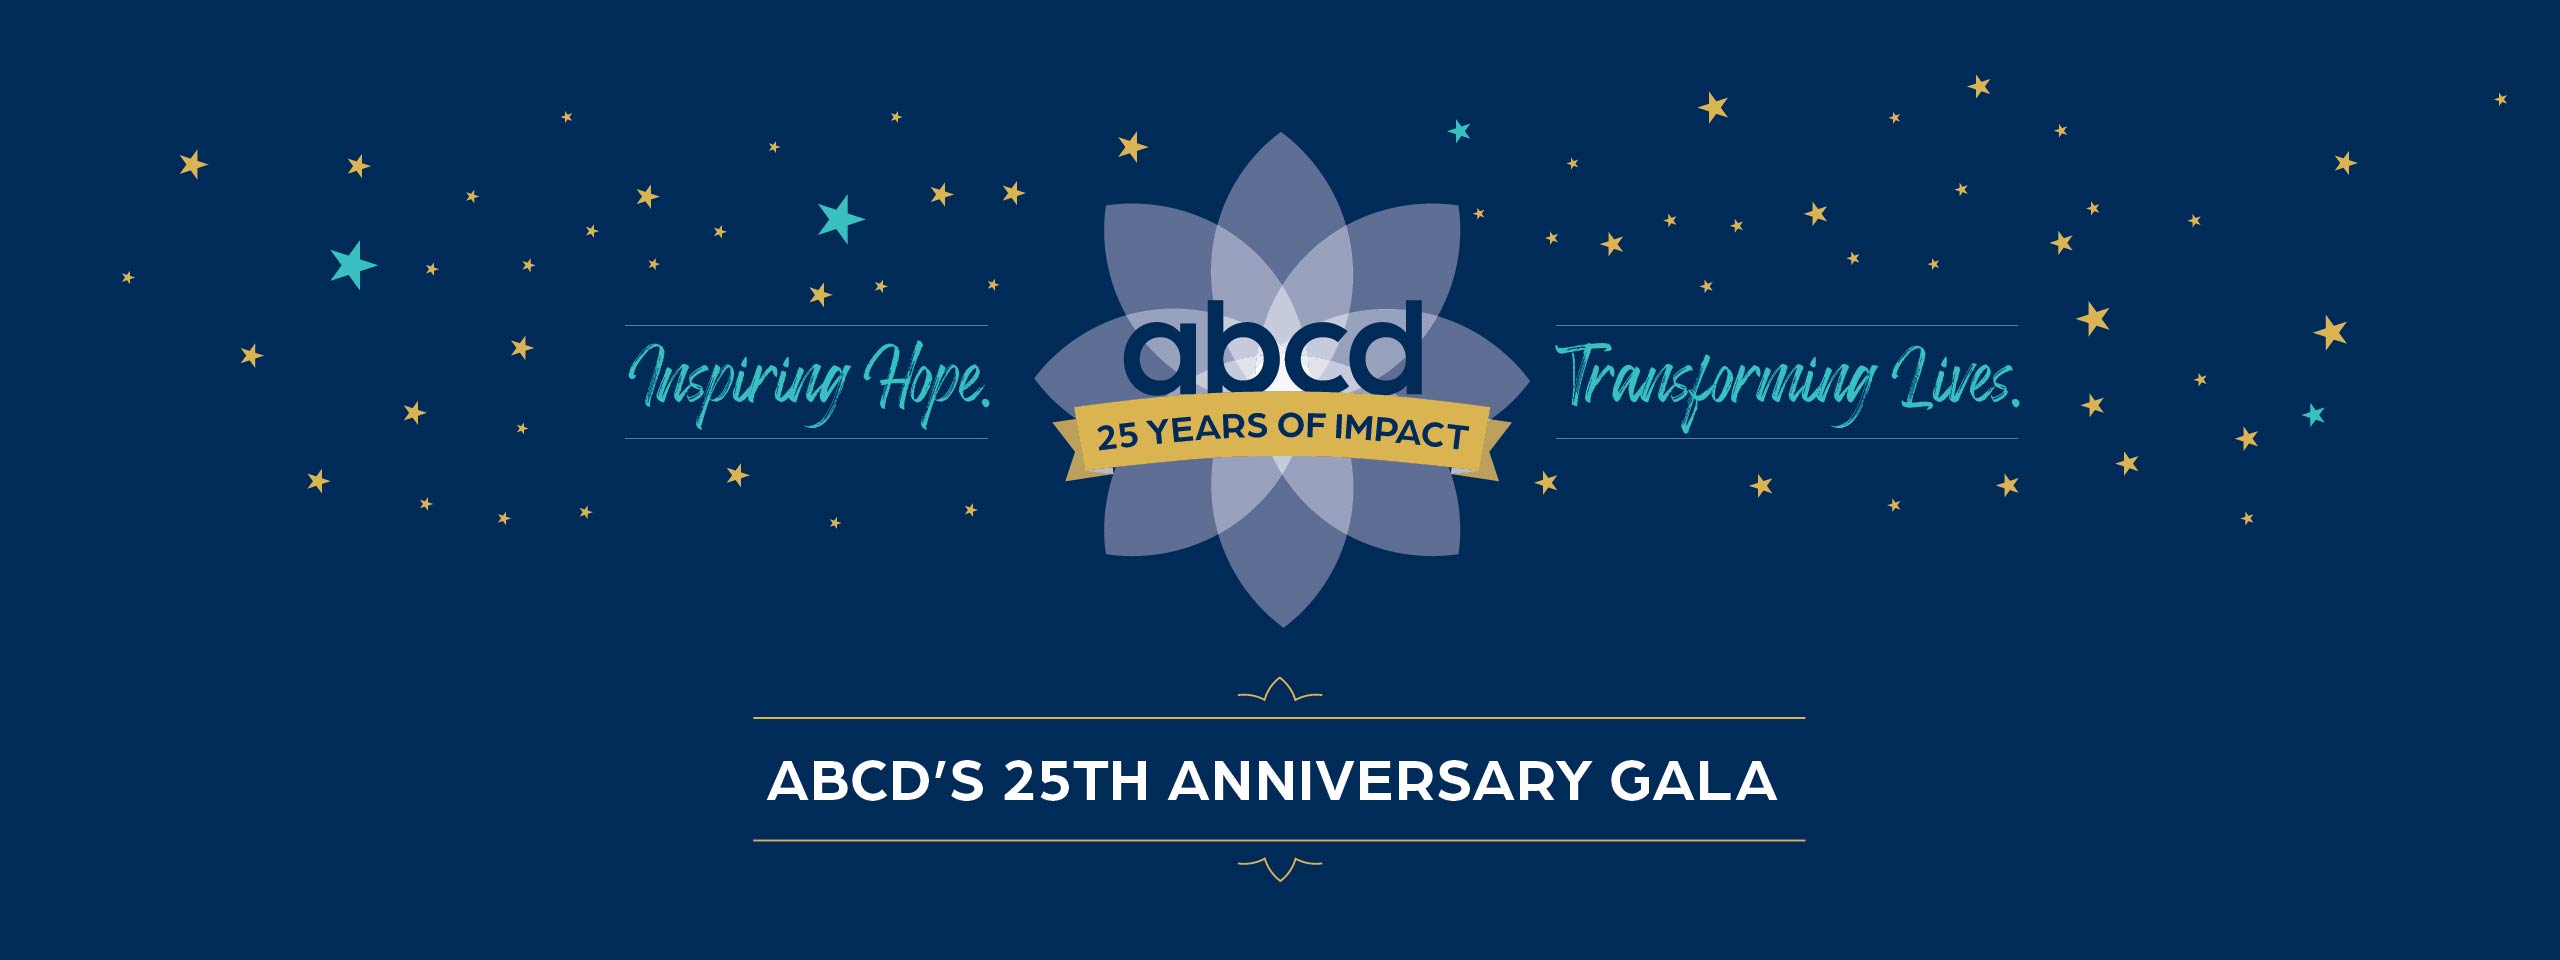 ABCD 25 Years of Impact logo. Inspiring Hope. Transforming Lives. ABCD's 25th Anniversary Gala